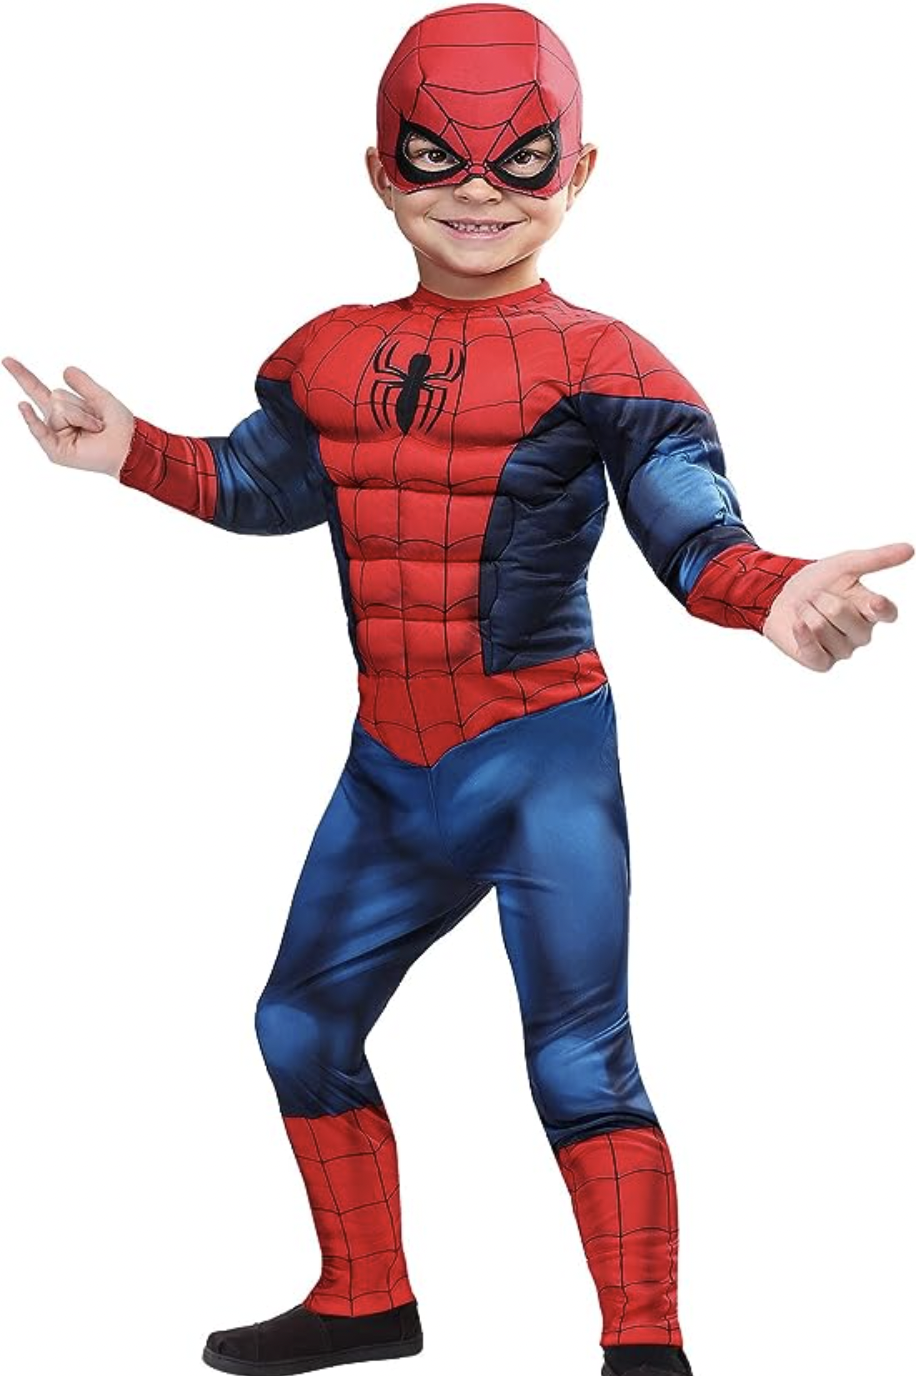 How to make a spiderman costume for kids and adults  Kids spiderman costume,  Diy costumes kids, Diy costumes kids boys